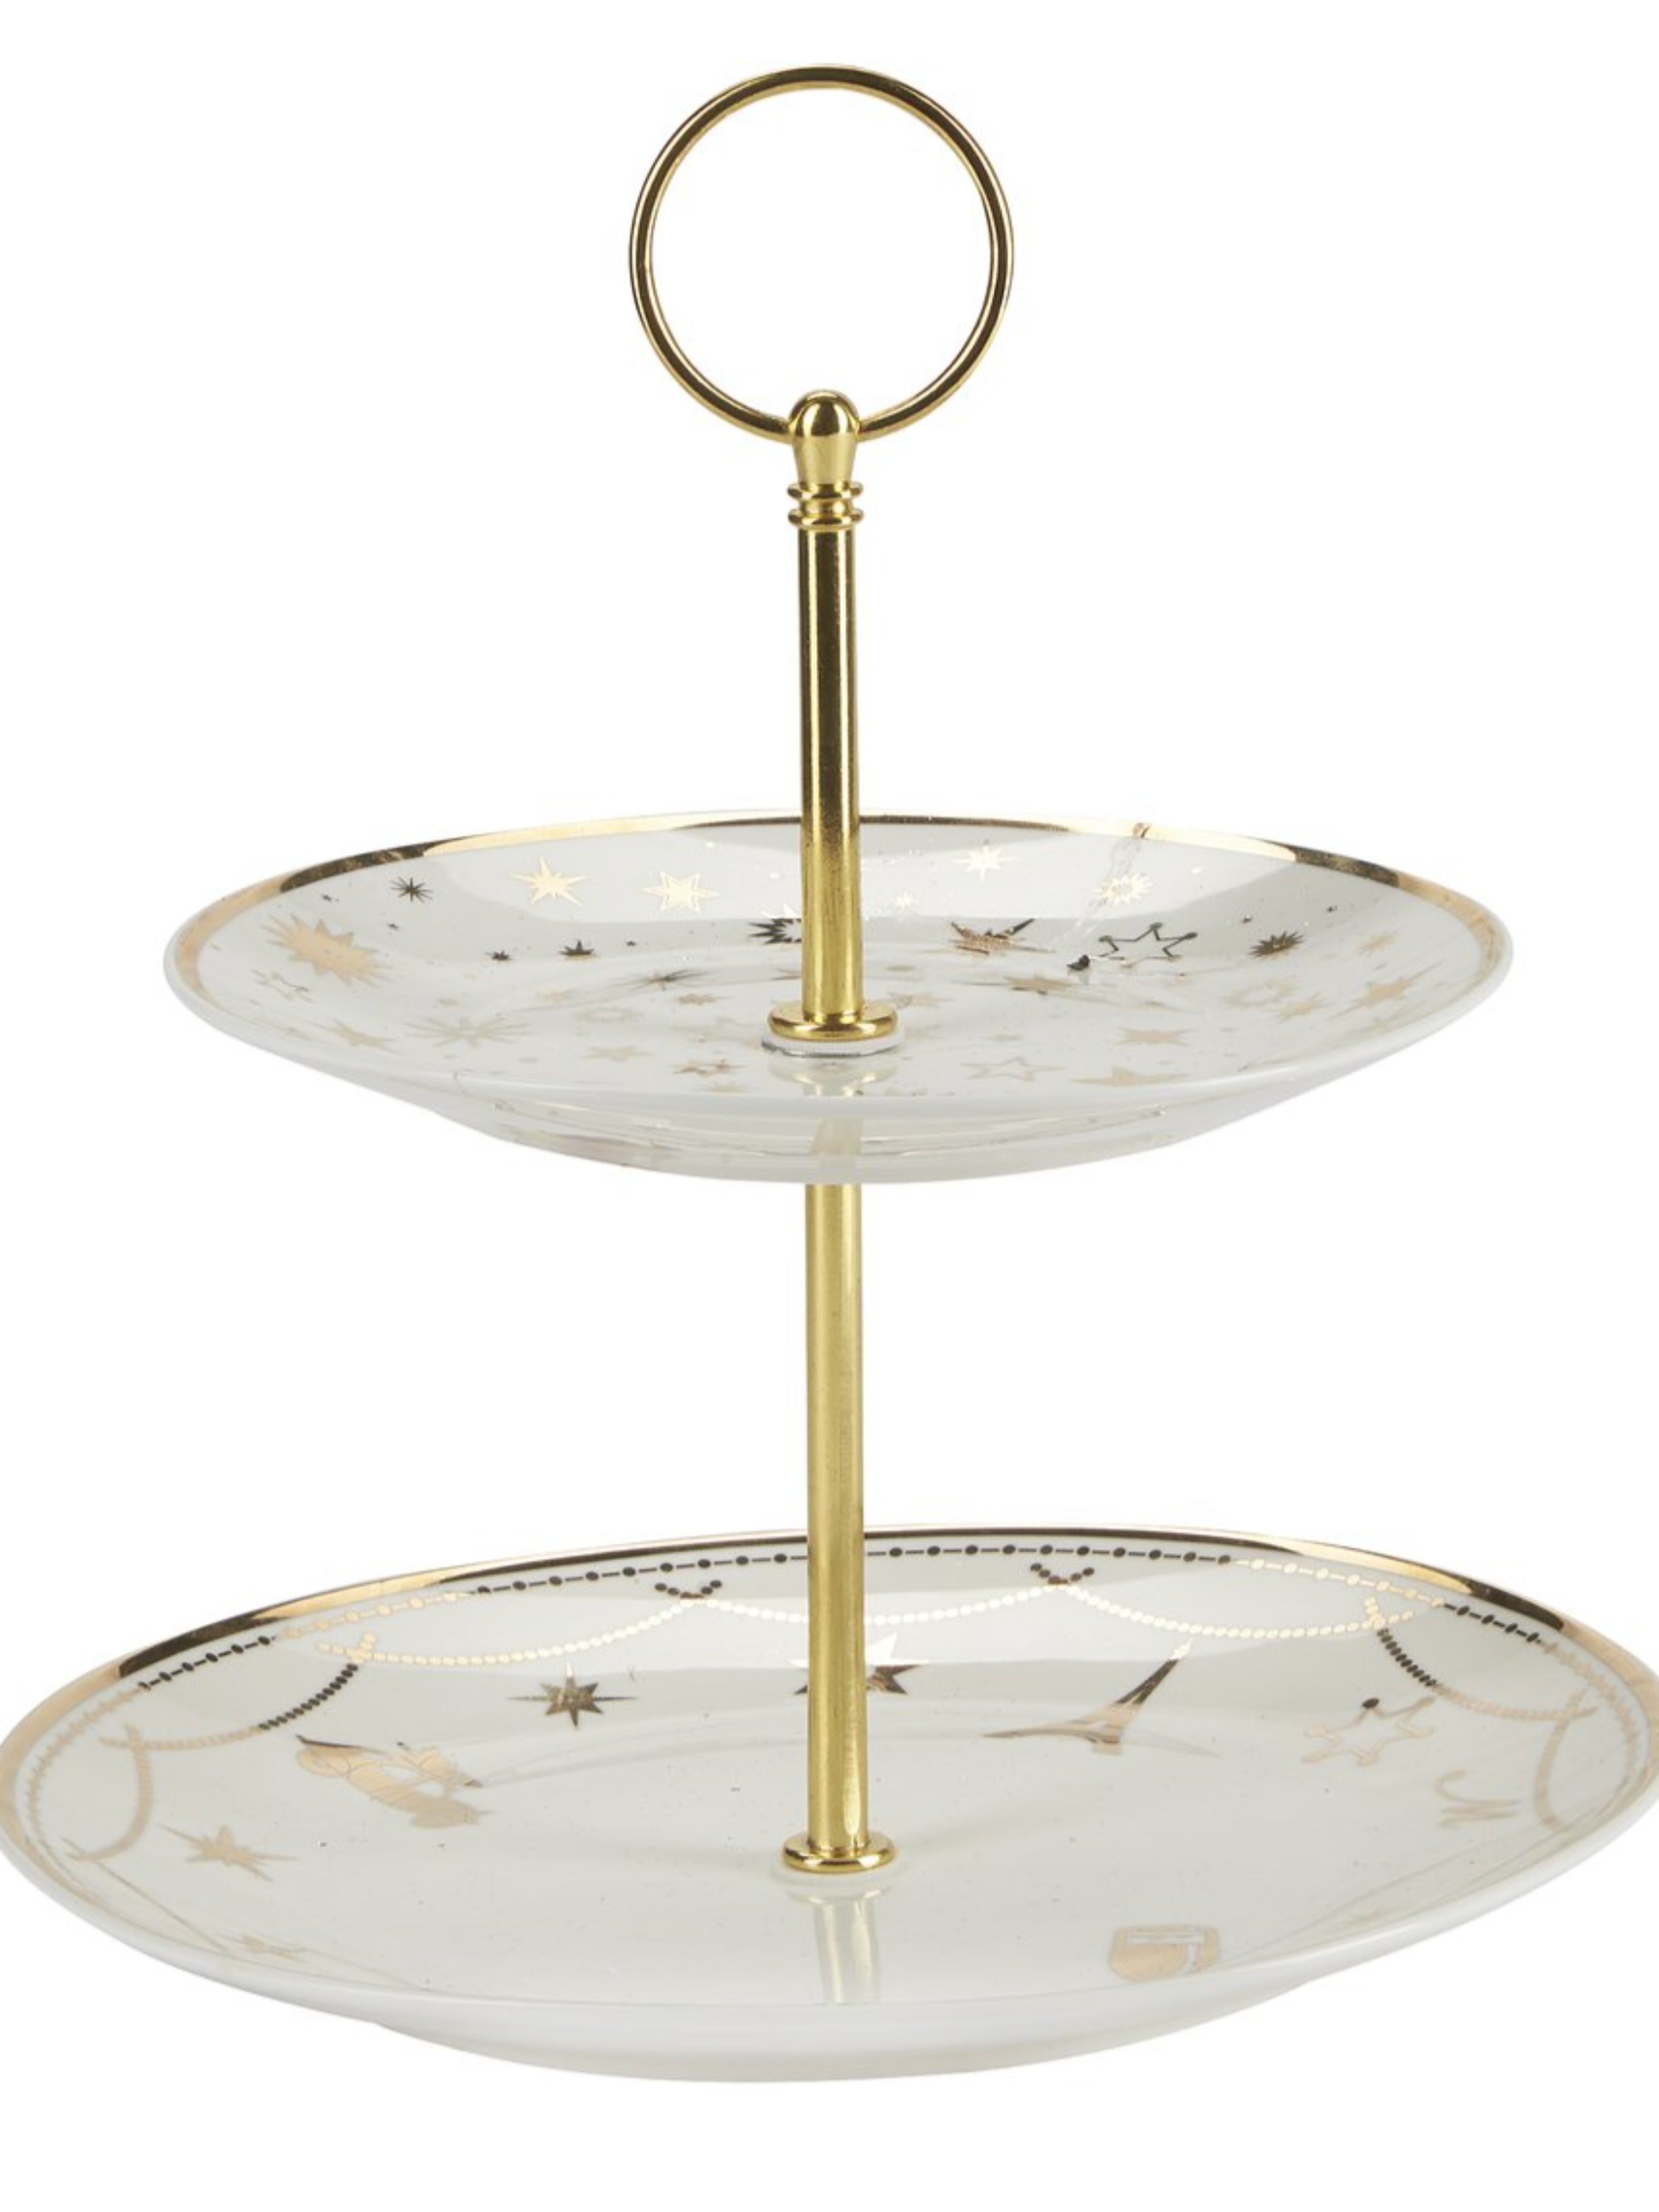 Miss Etoile Two Tier Cake Stand with Gold Star Design Detailing